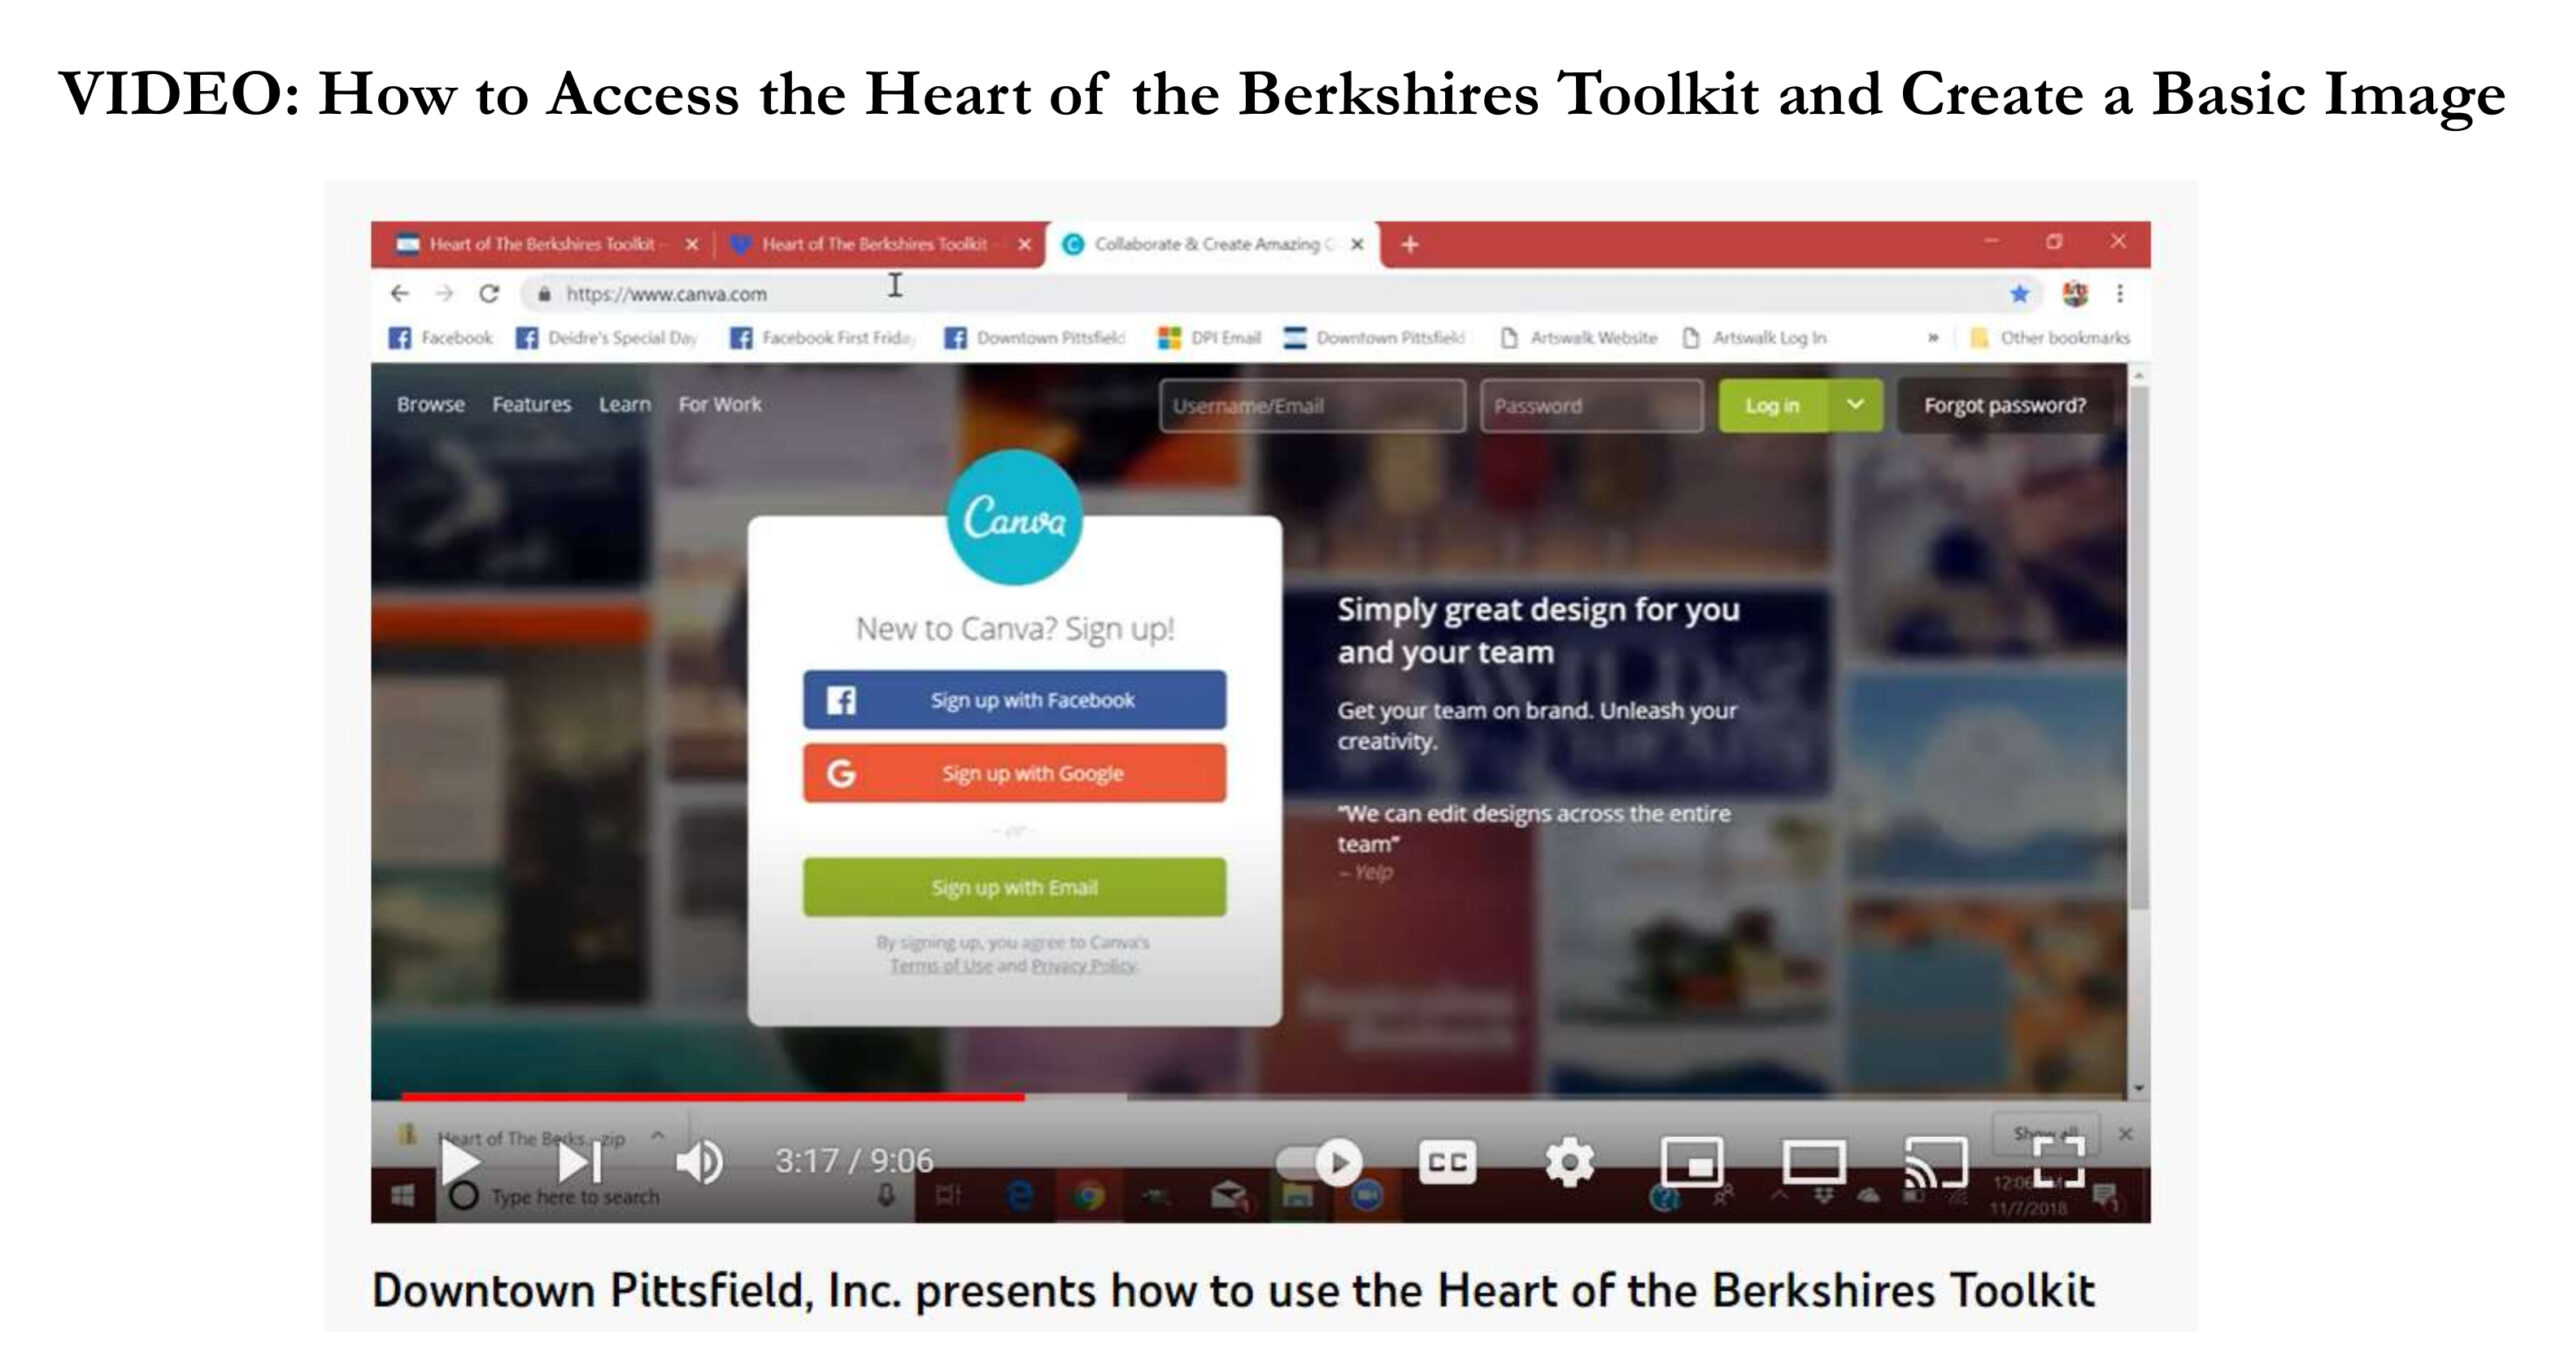 VIDEO: How to Access the Heart of the Berkshires Toolkit and Create a Basic Image